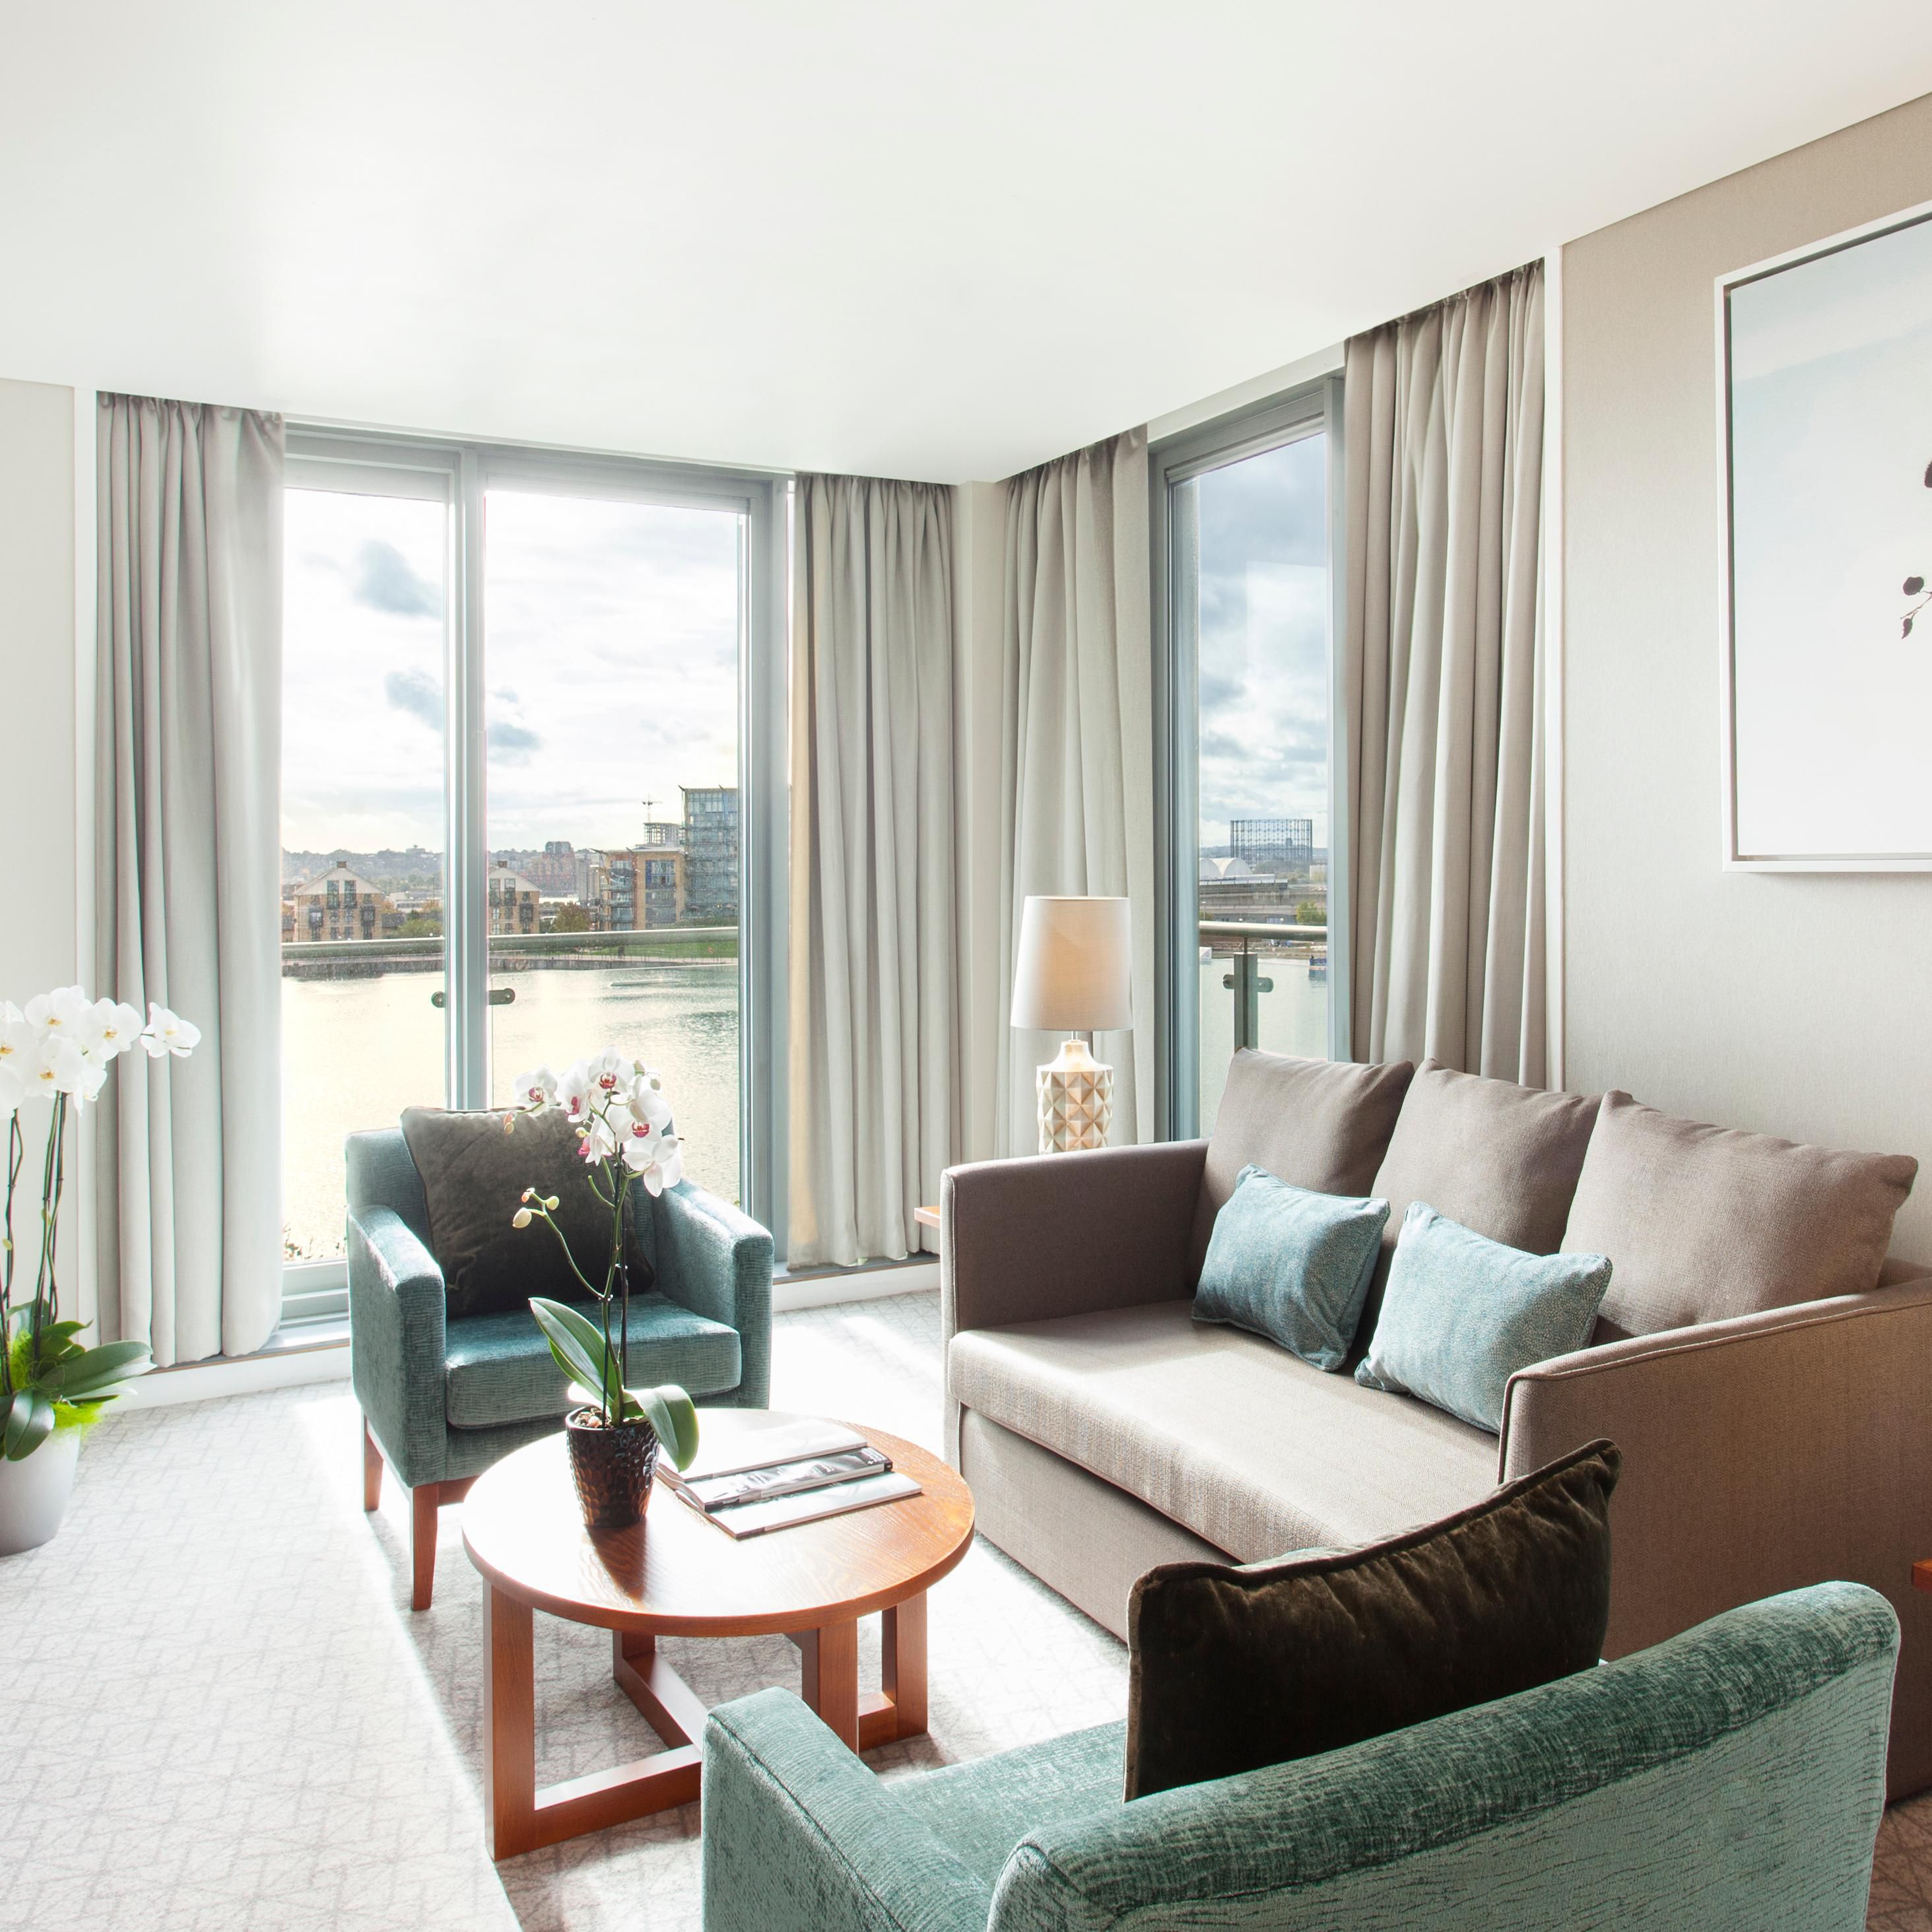 Executive suite living area with panoramic views of the river